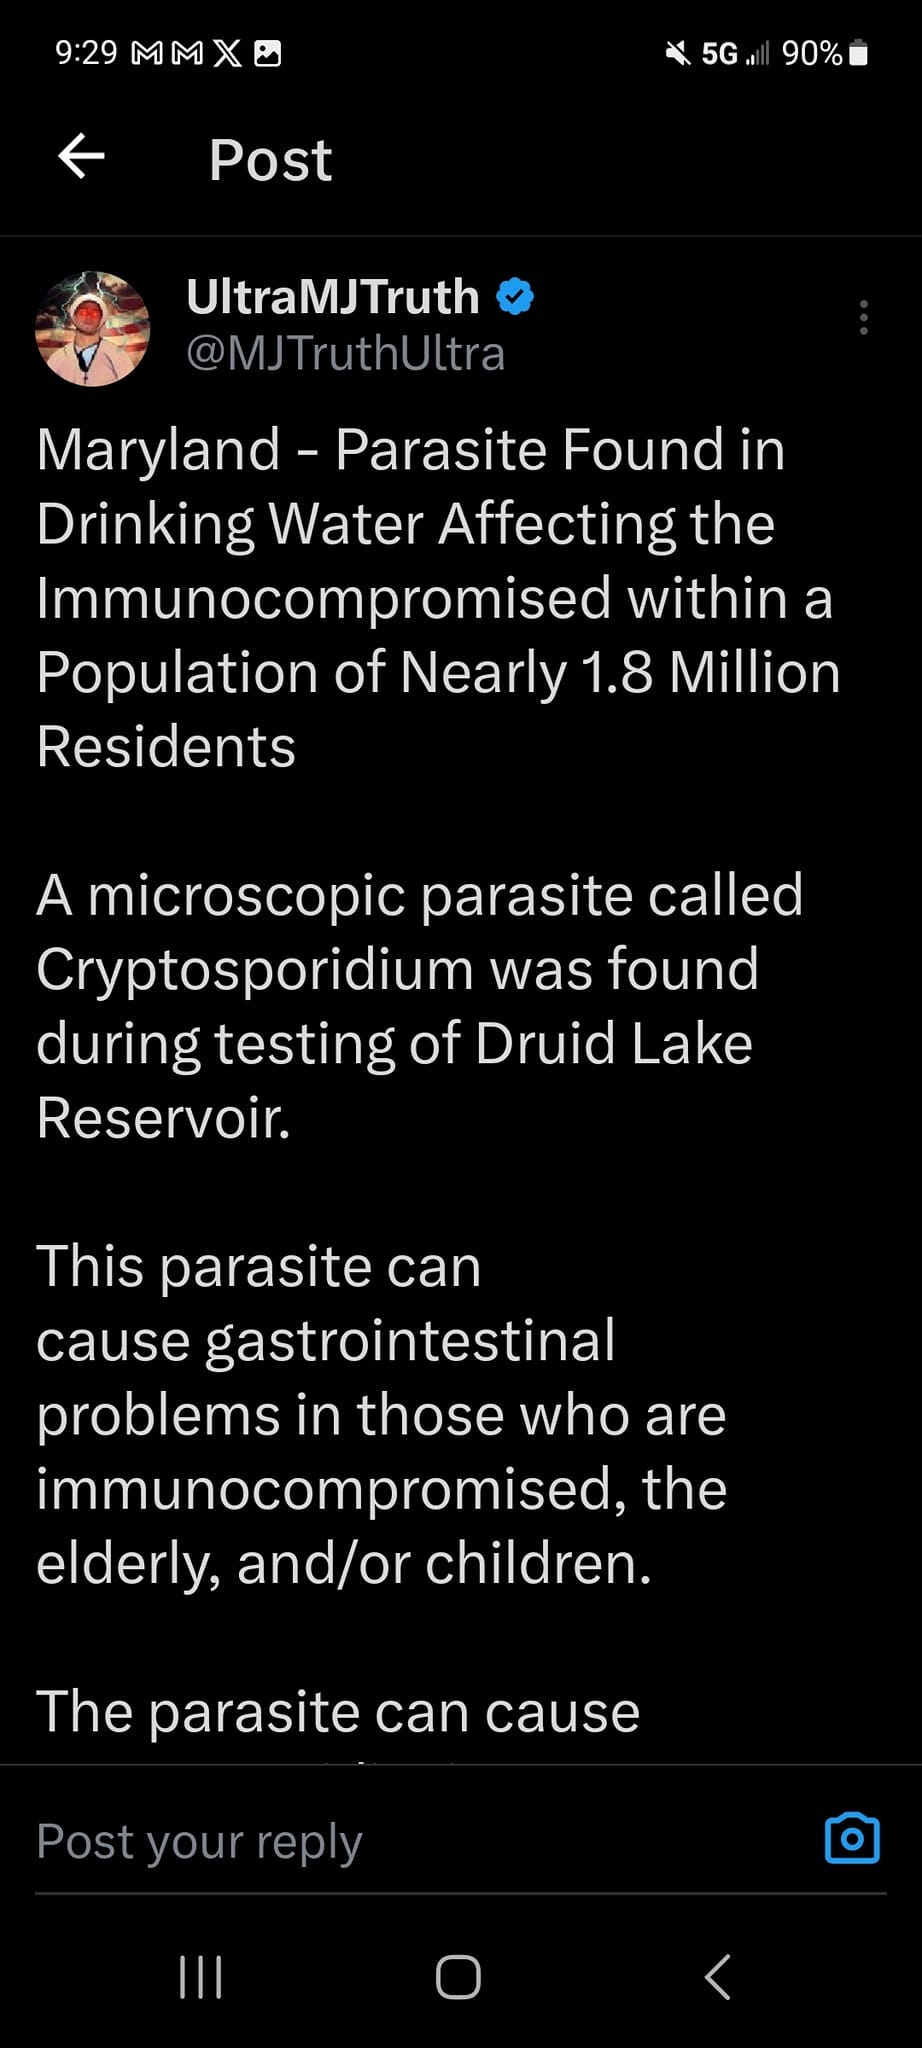 May be a graphic of text that says '9:29 MMX 5G 90% Post UltraMJTruth @MJTruthUltra Maryland Parasite Found in Drinking Water Affecting the Immunocompromisec within a Population of Nearly 1.8 Million Residents A microscopic parasite called Cryptosporidium was found during testing of Druid Lake Reservoir. This parasite can cause gastrointestinal problems in those who are immunocompromised, the elderly, and/or children. The parasite can cause Post your'